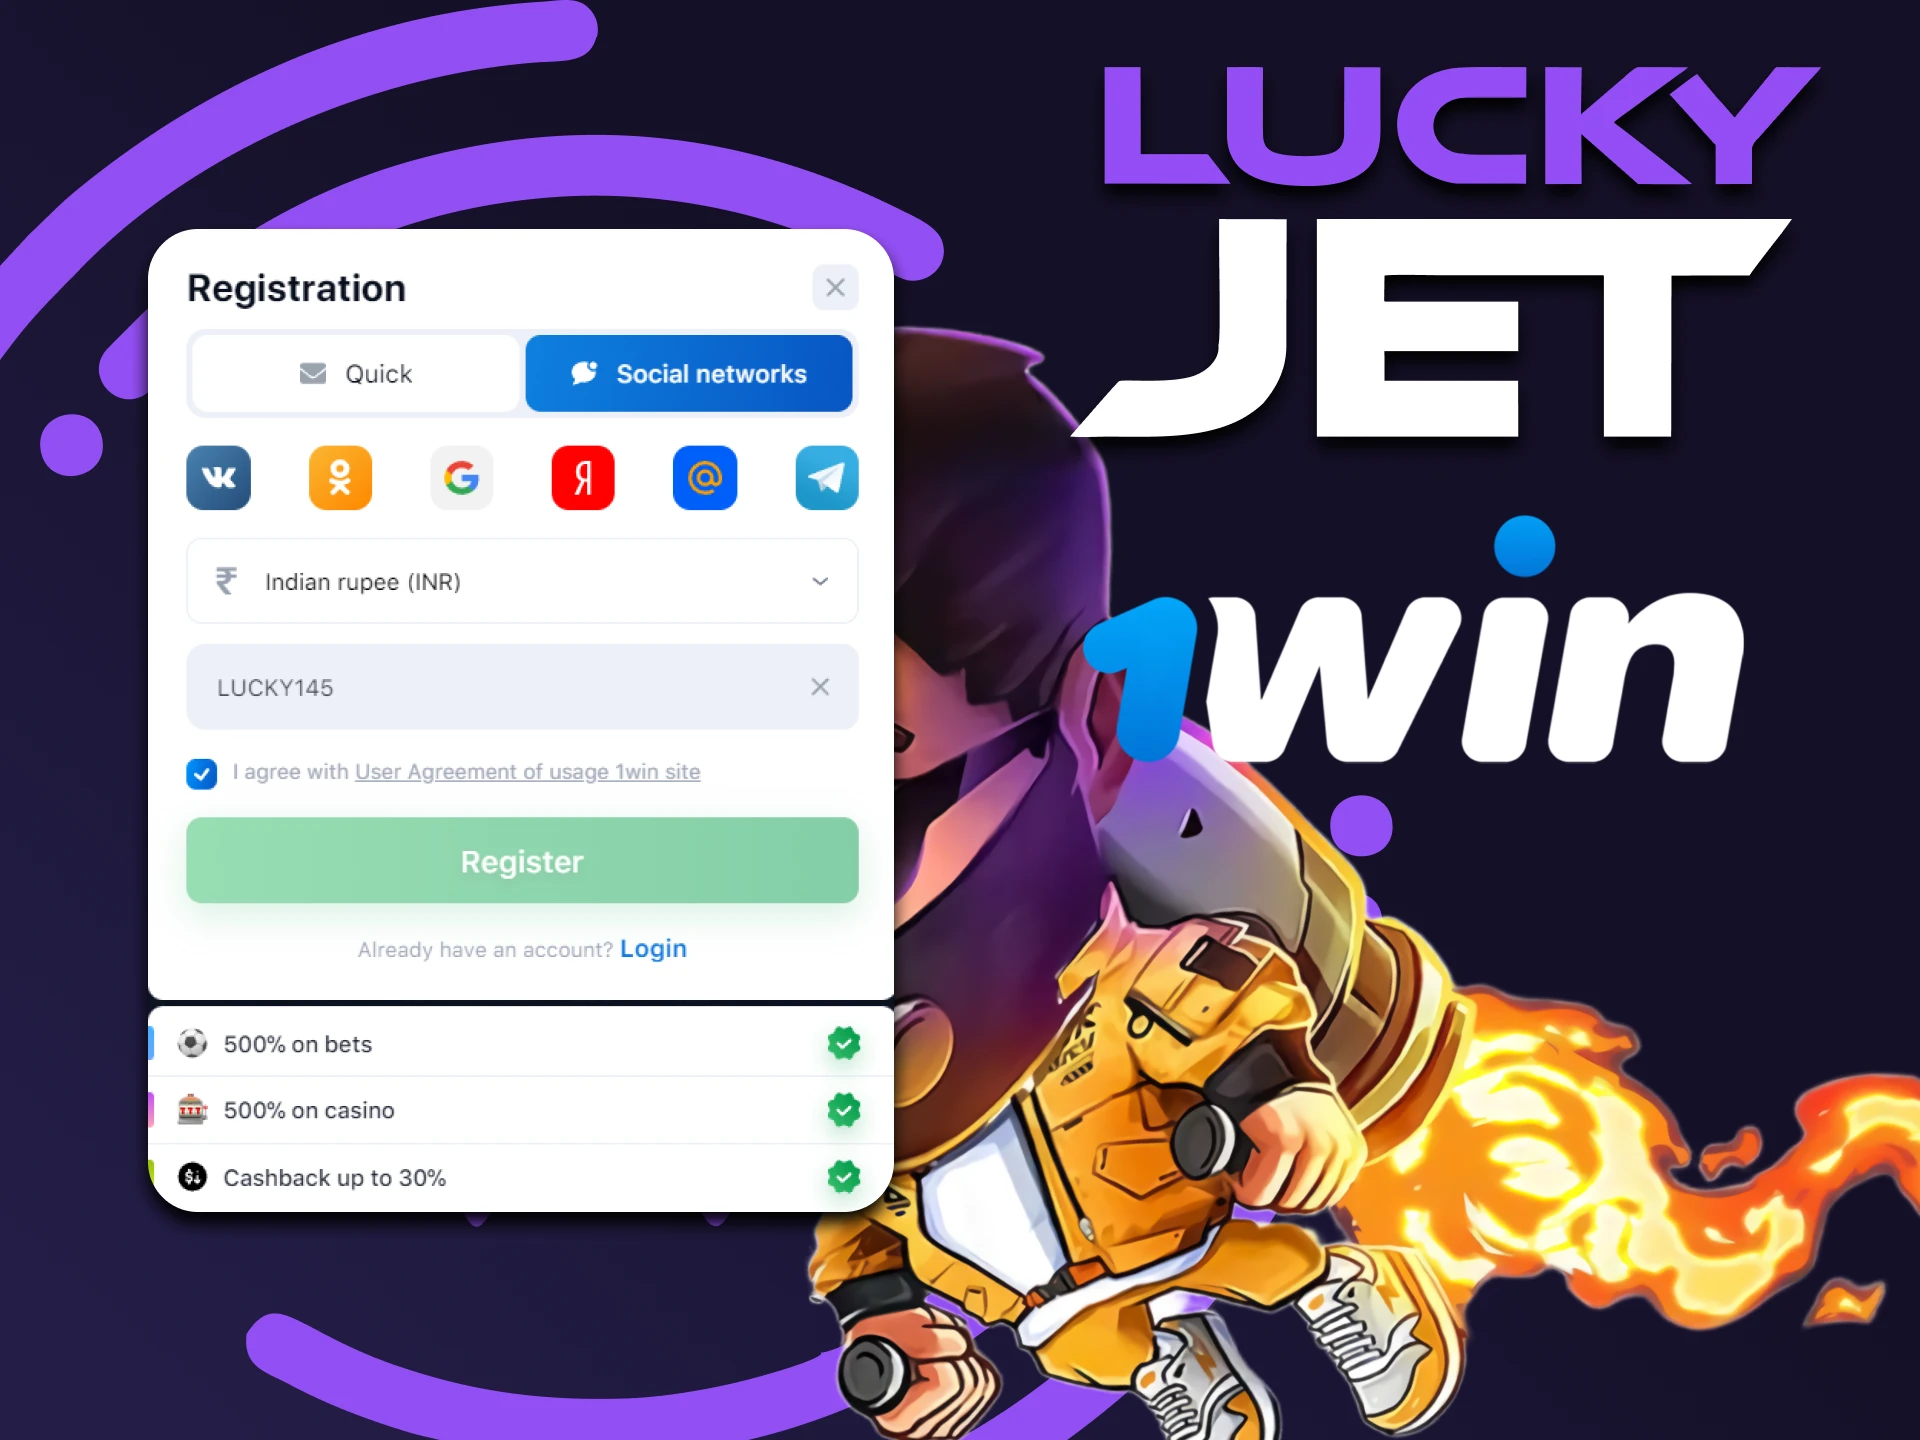 Get a bonus from 1win by entering the promotional code for the game Lucky Jet.